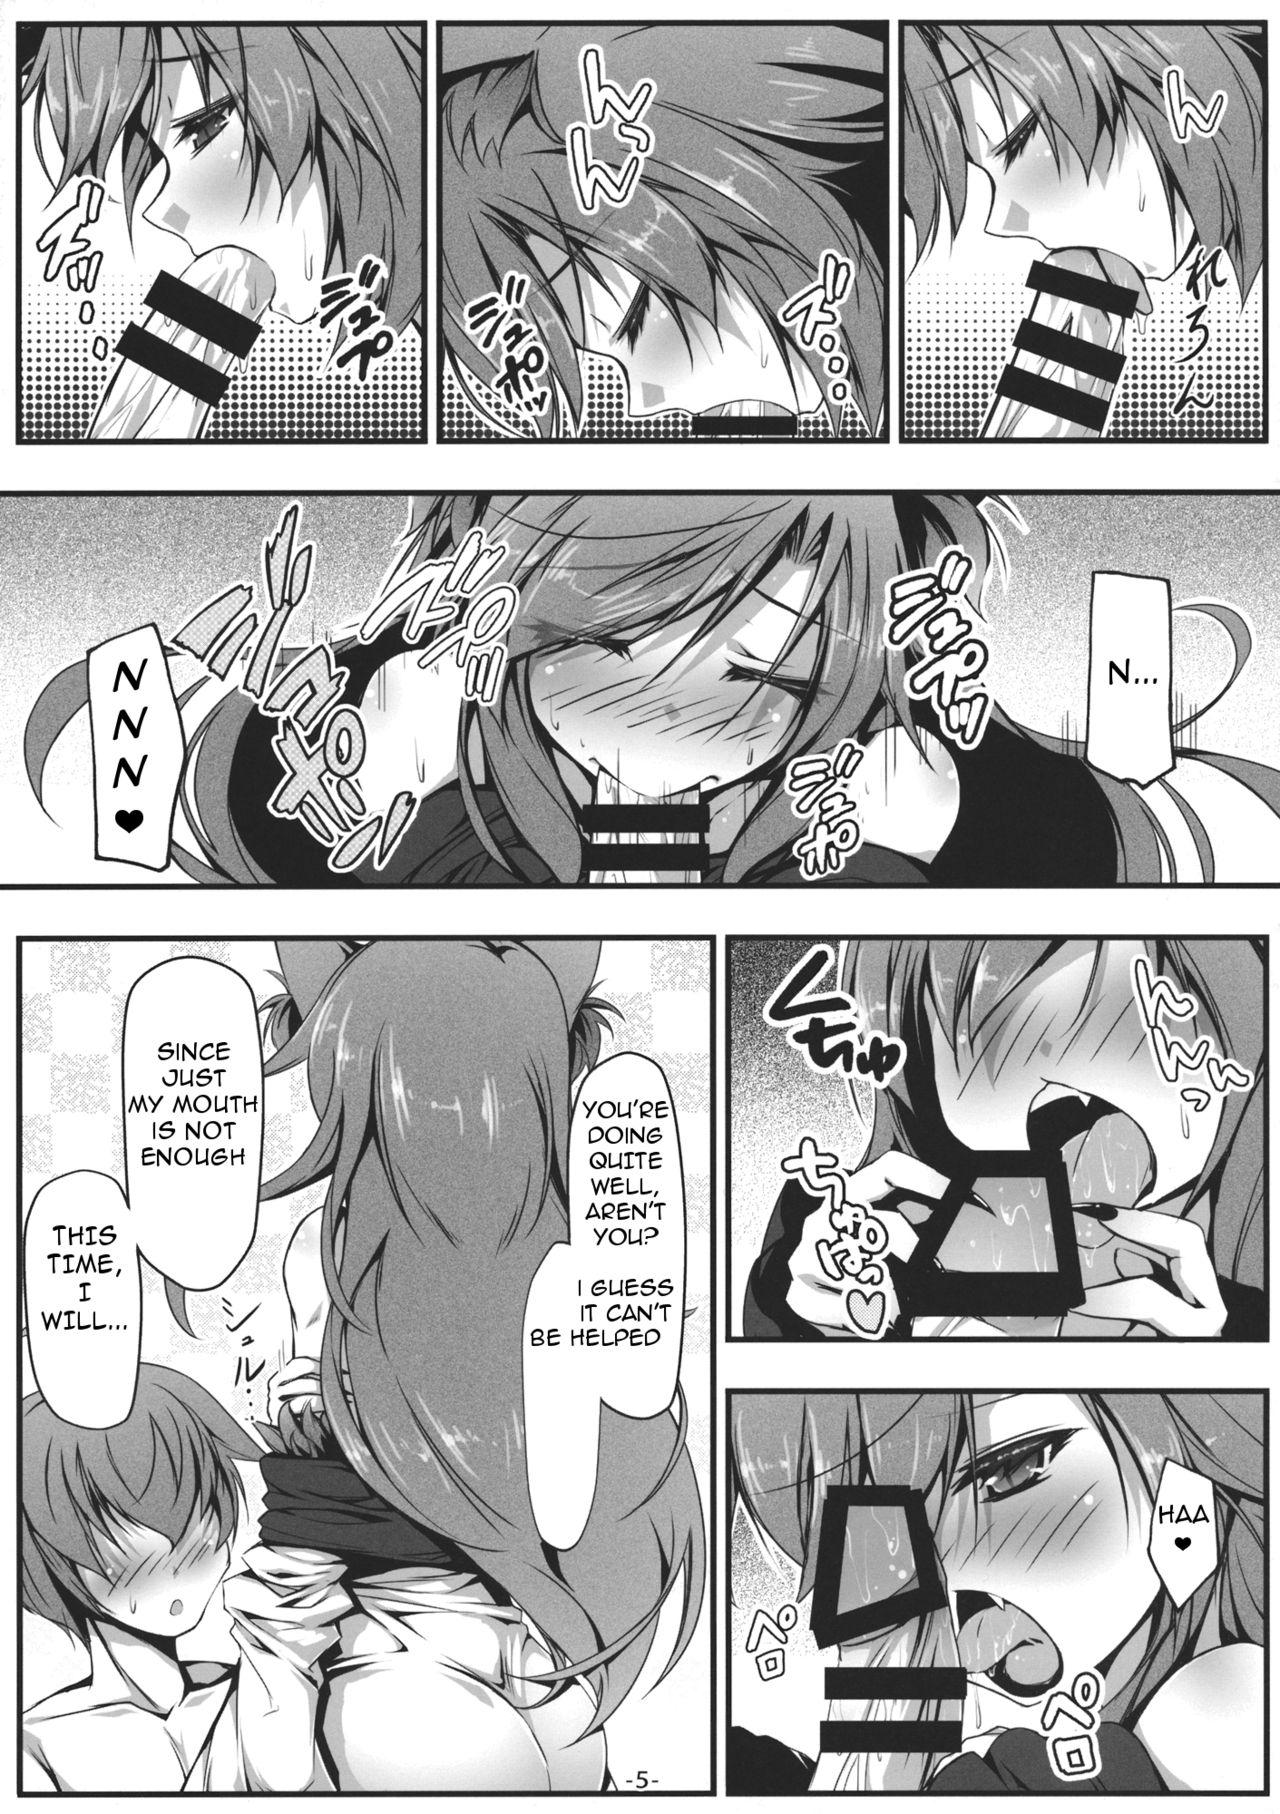 Students Kagerou to Wan Wan O!! | Barking with Kagerou! - Touhou project Tight Ass - Page 6